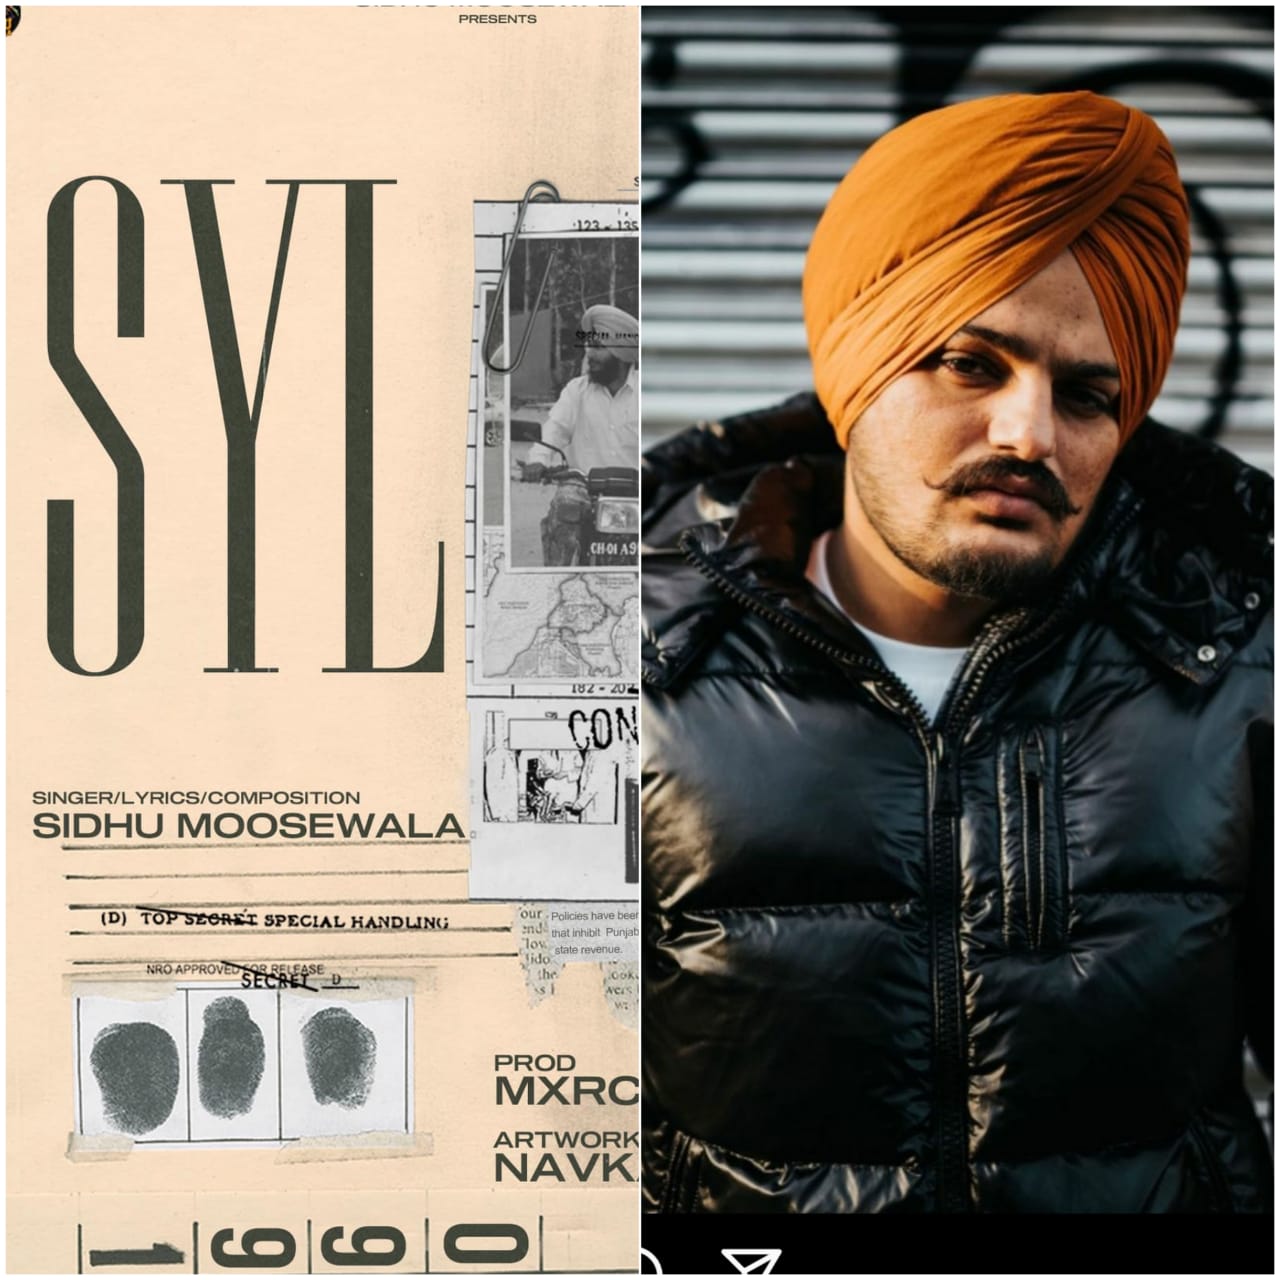 Sidhu Moosewala’s new song ‘SYL’ taken off YouTube in India